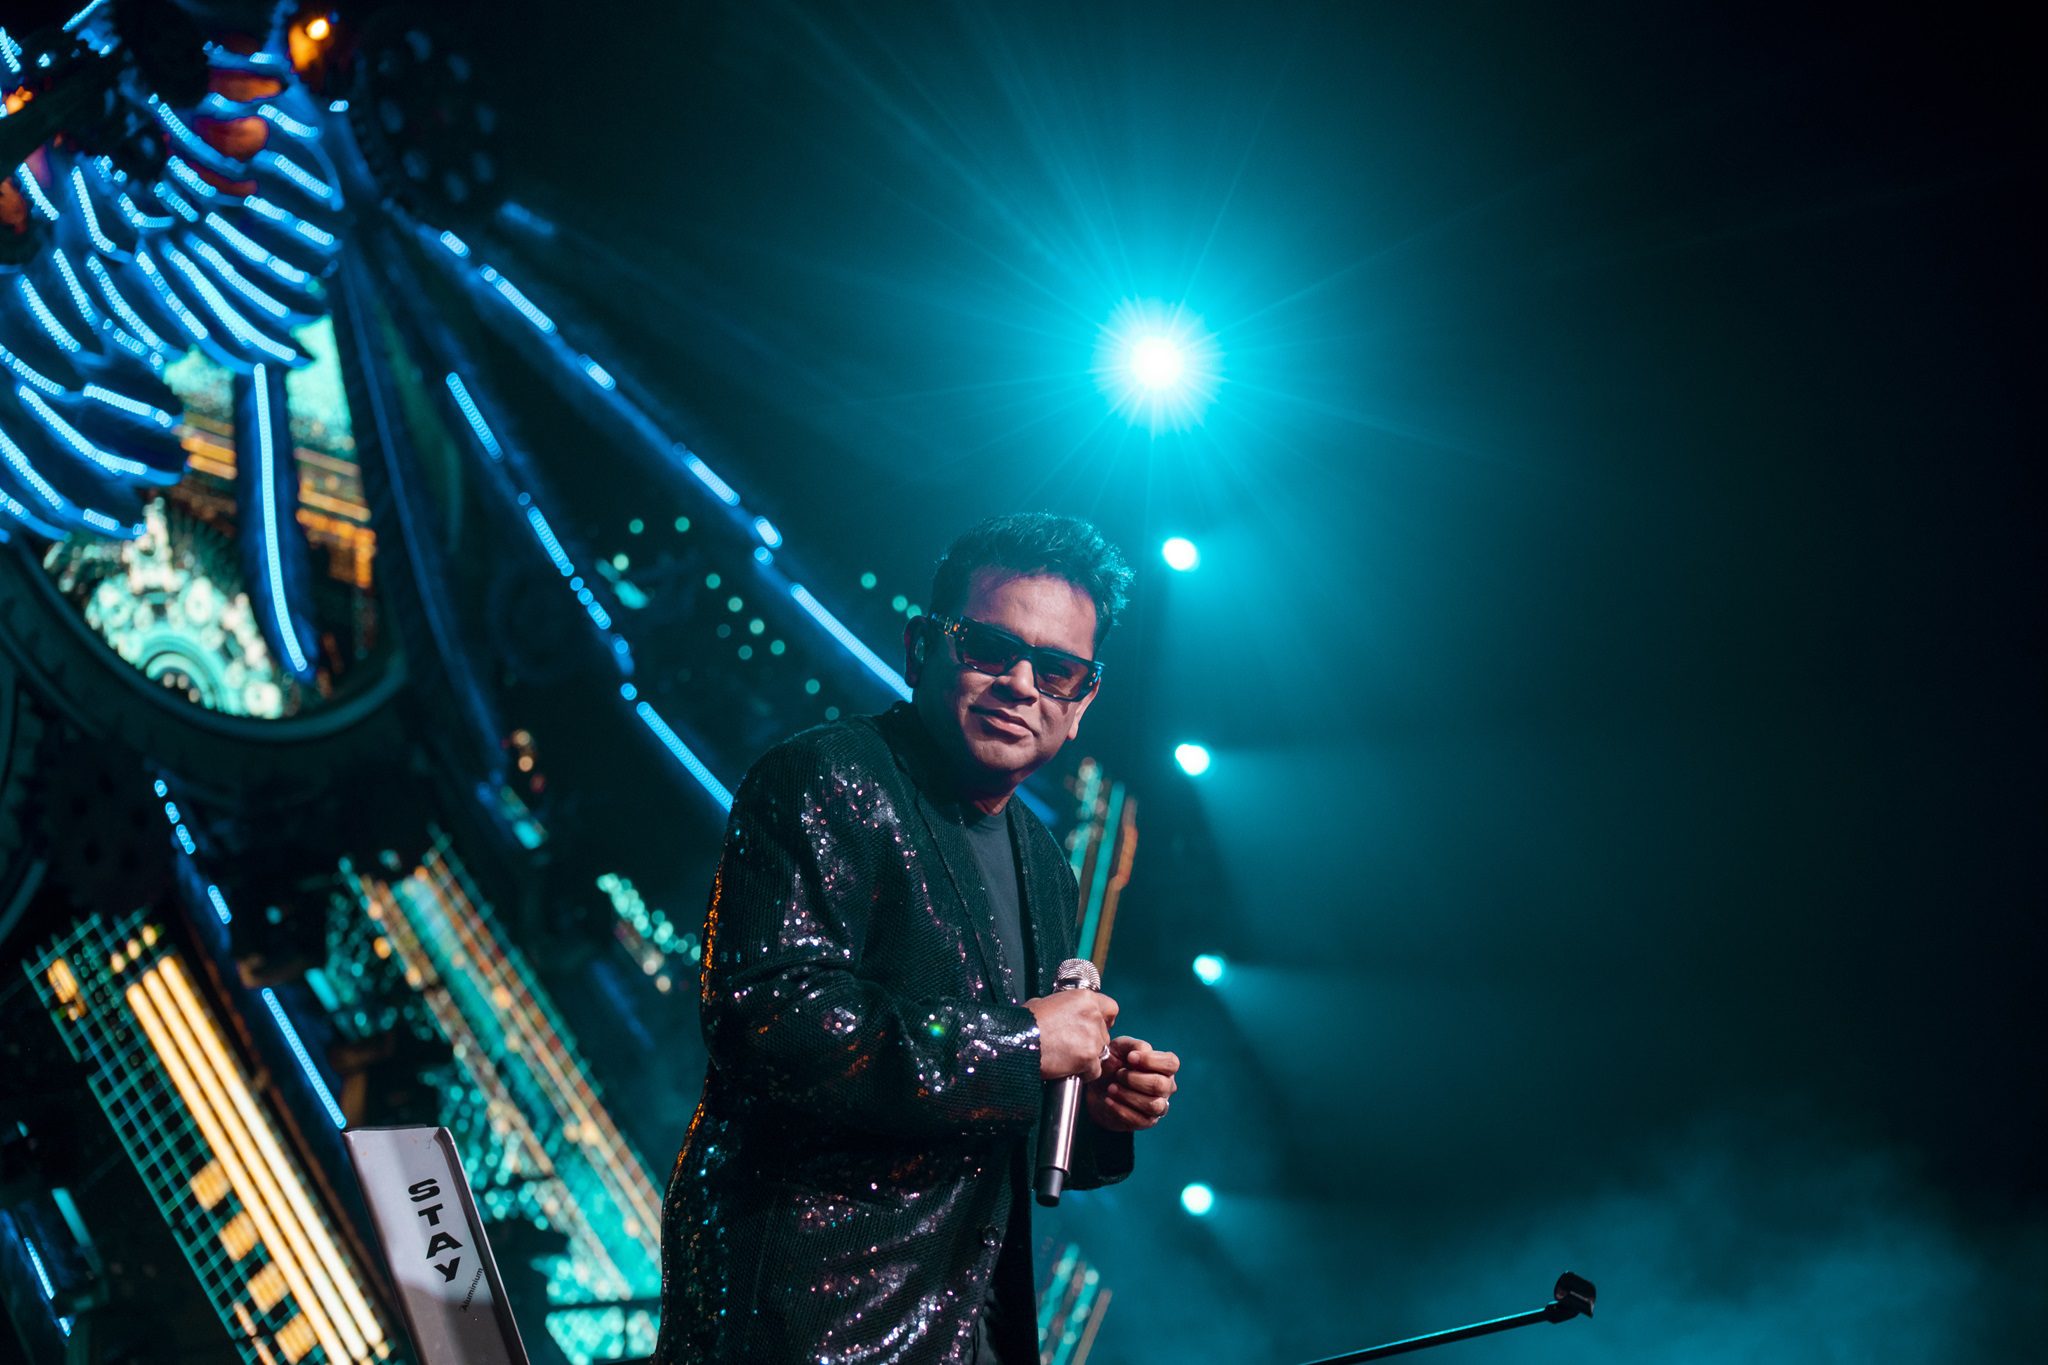 A.R. Rahman Toasts ‘The Unsung’ in New Song with Firdaus Orchestra